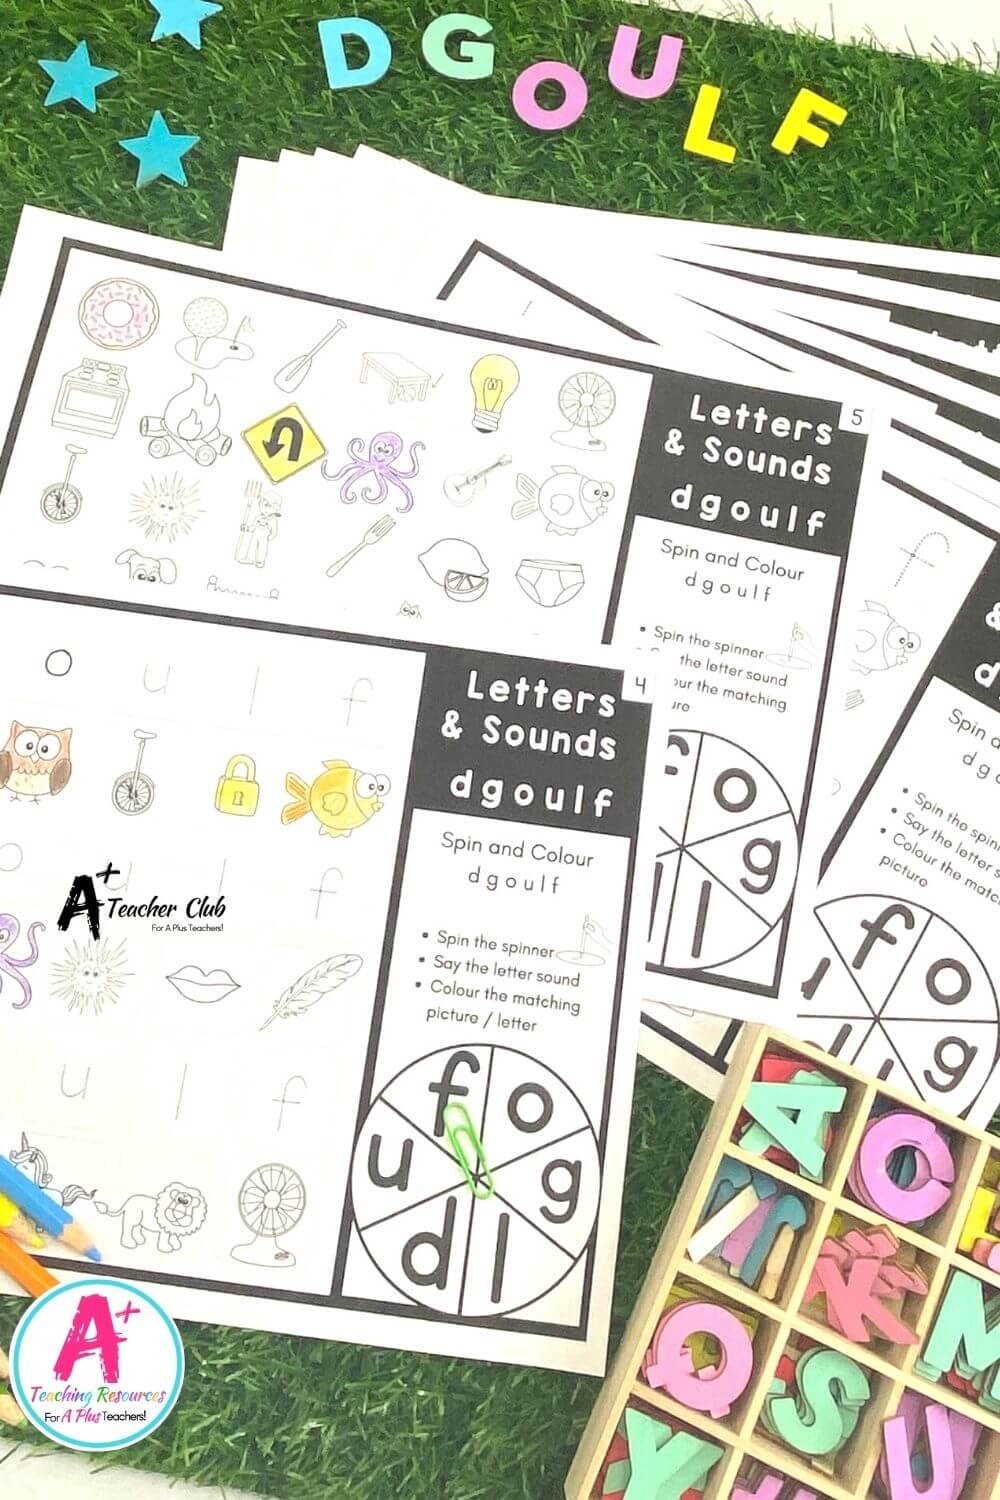 DGOULF Spin & Colour Worksheets (B&W LOWER CASE)